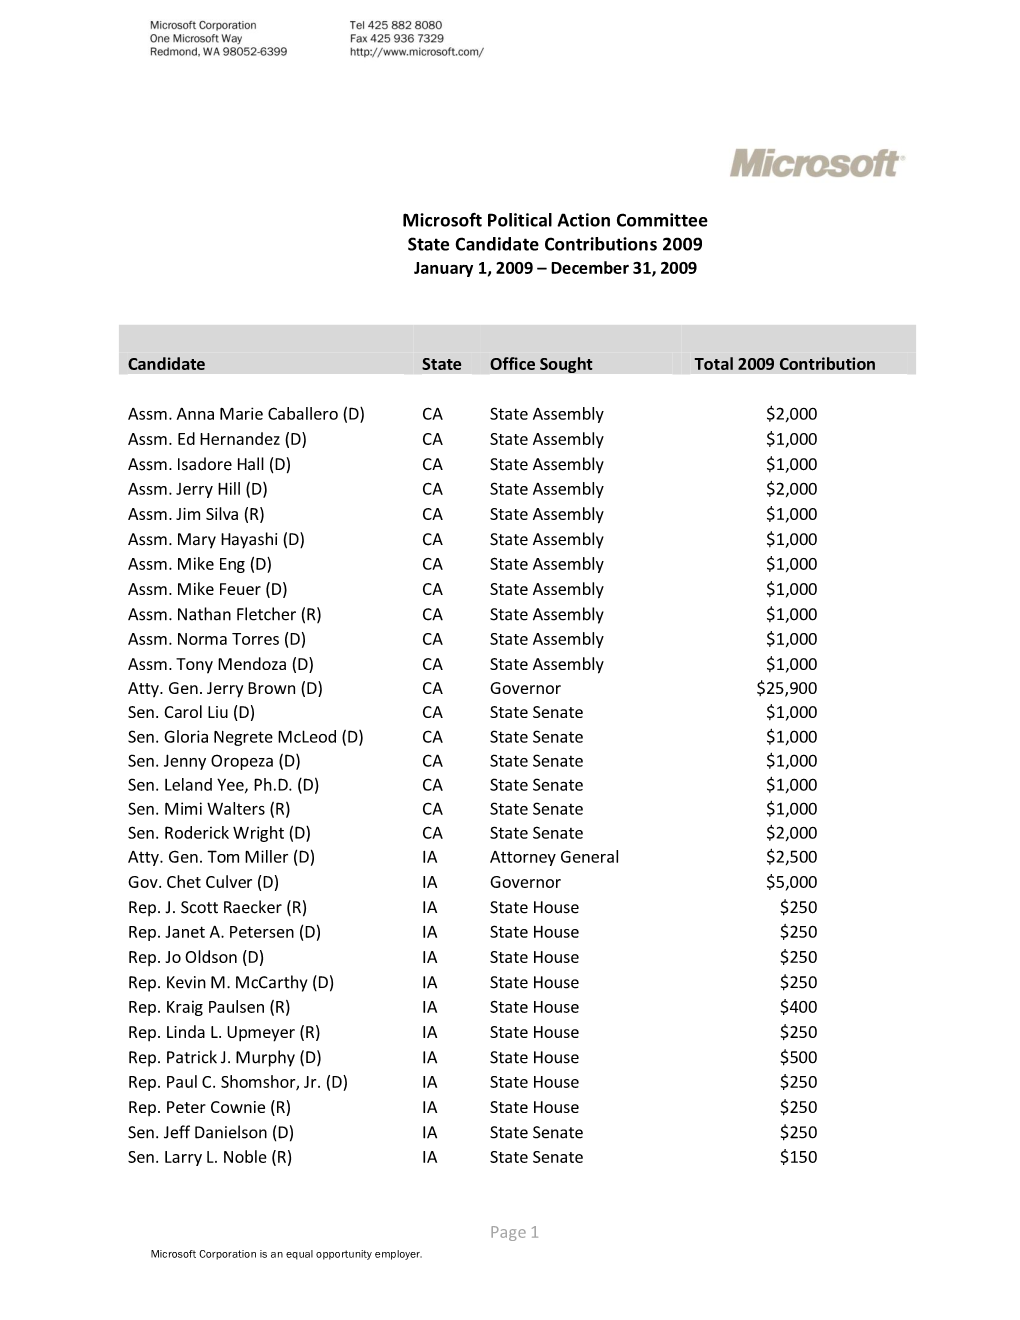 Microsoft Political Action Committee State Candidate Contributions 2009 January 1, 2009 – December 31, 2009